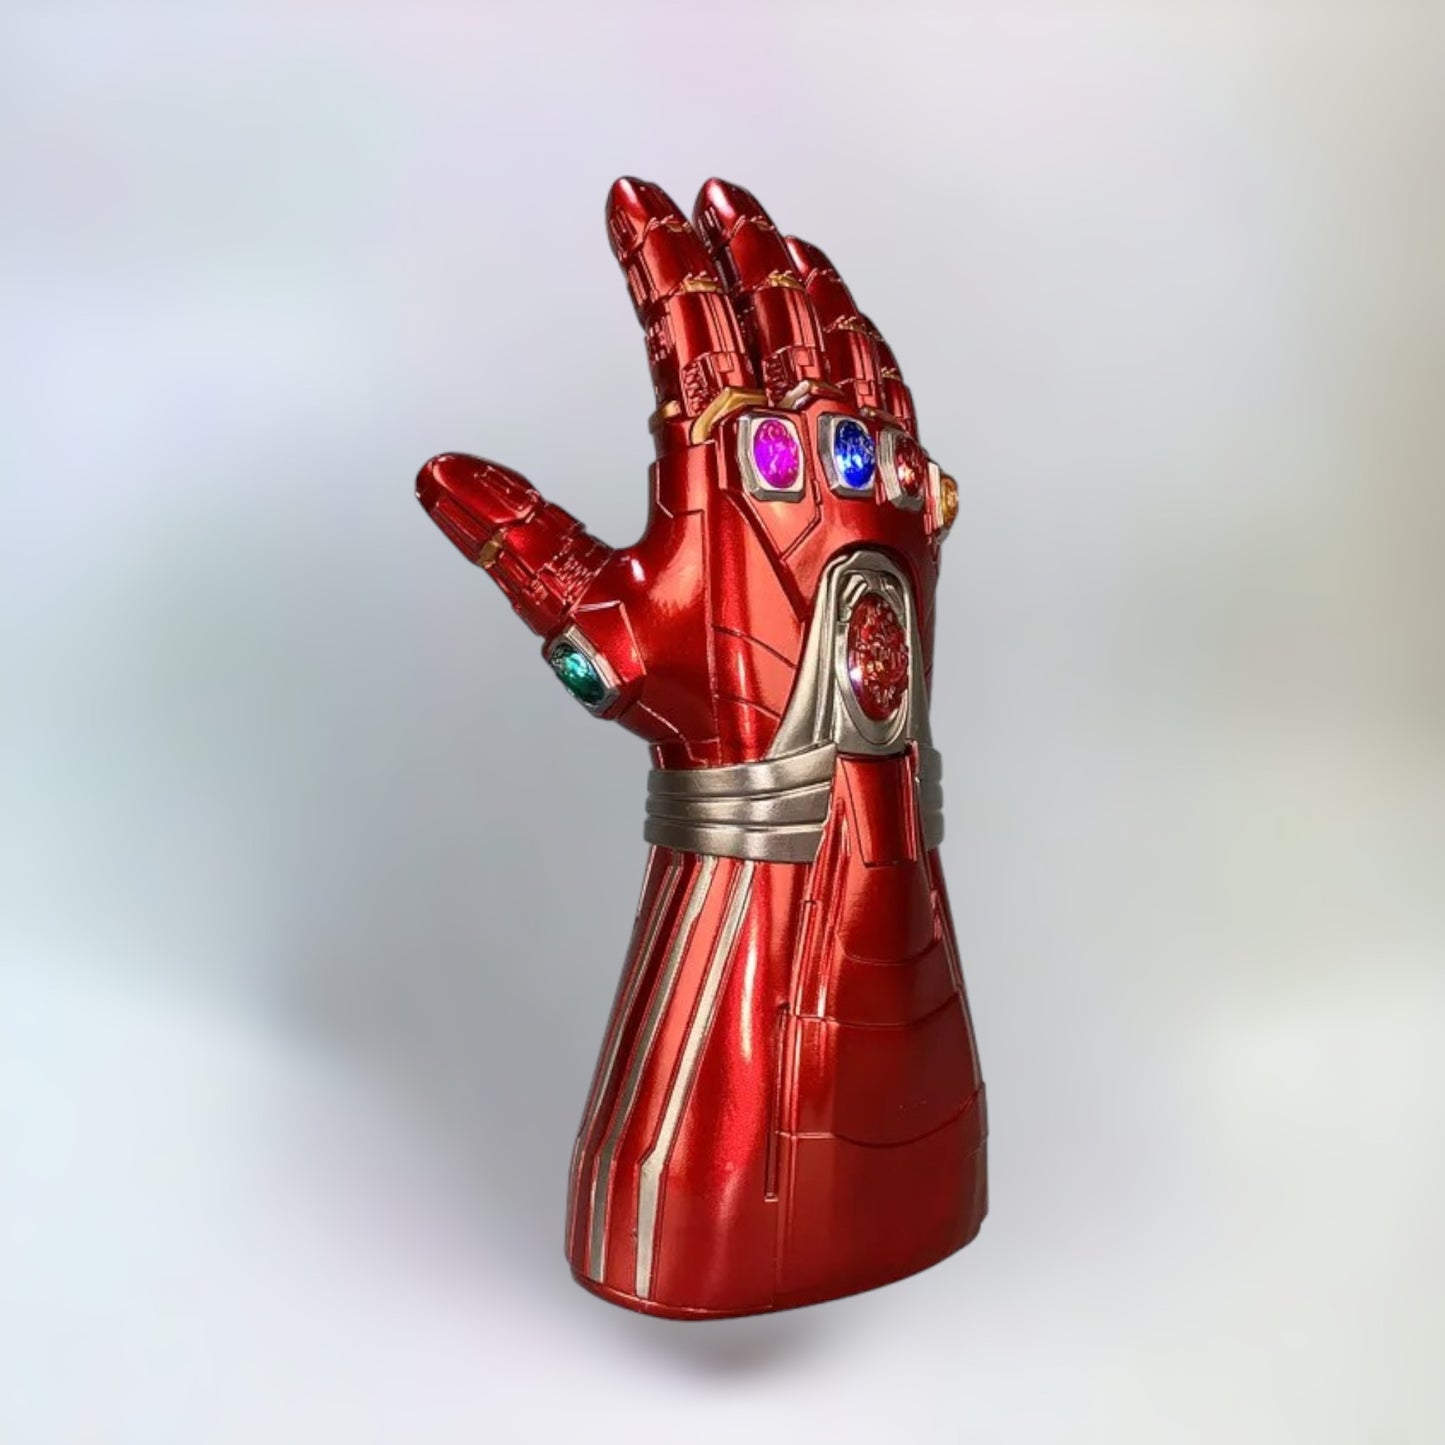 Ironman infinity gauntlet replica toy side view with plain white background